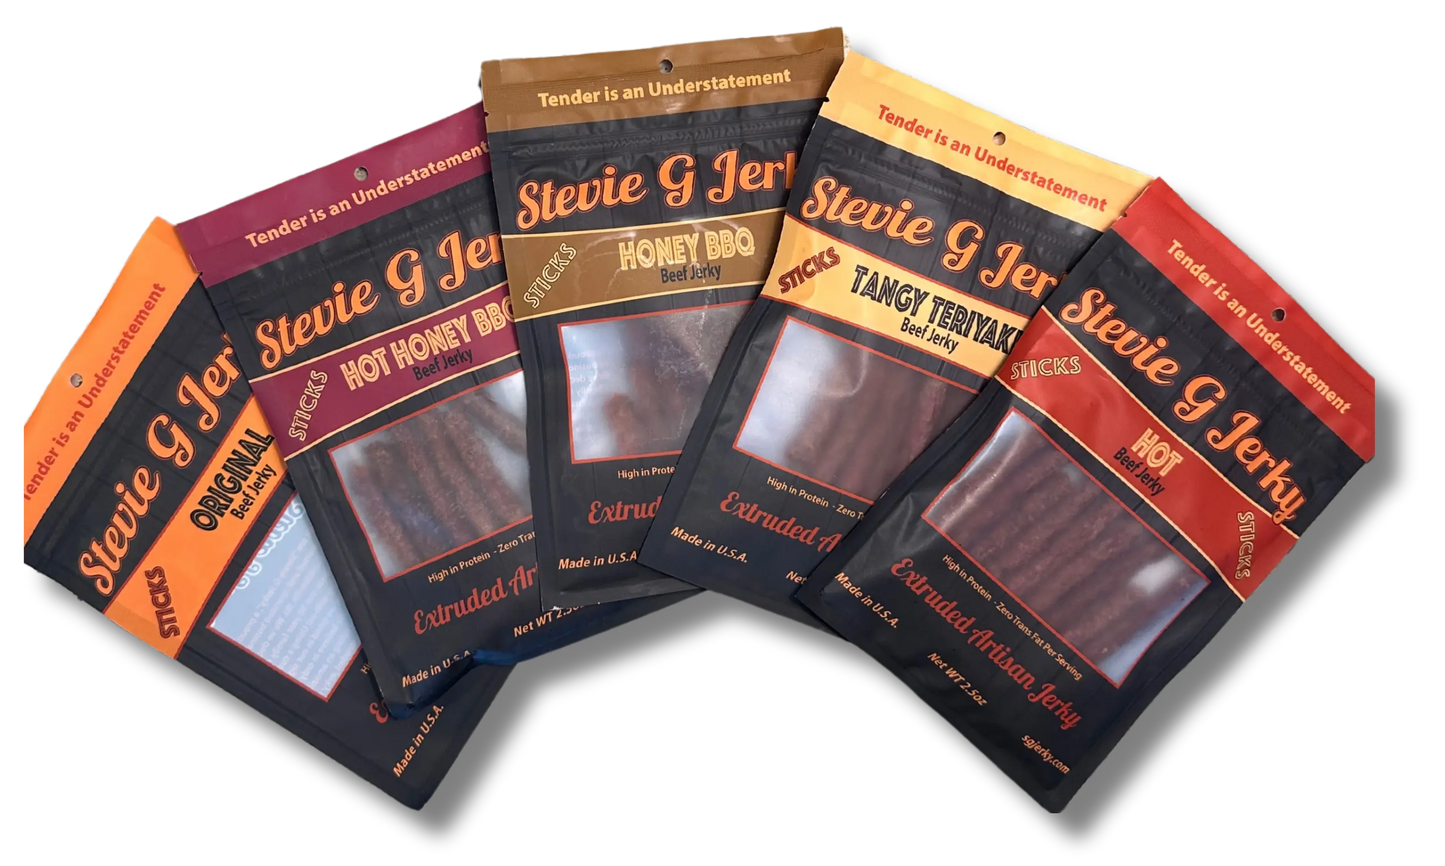 Five distinct flavors of beef jerky in the Variety Bundle